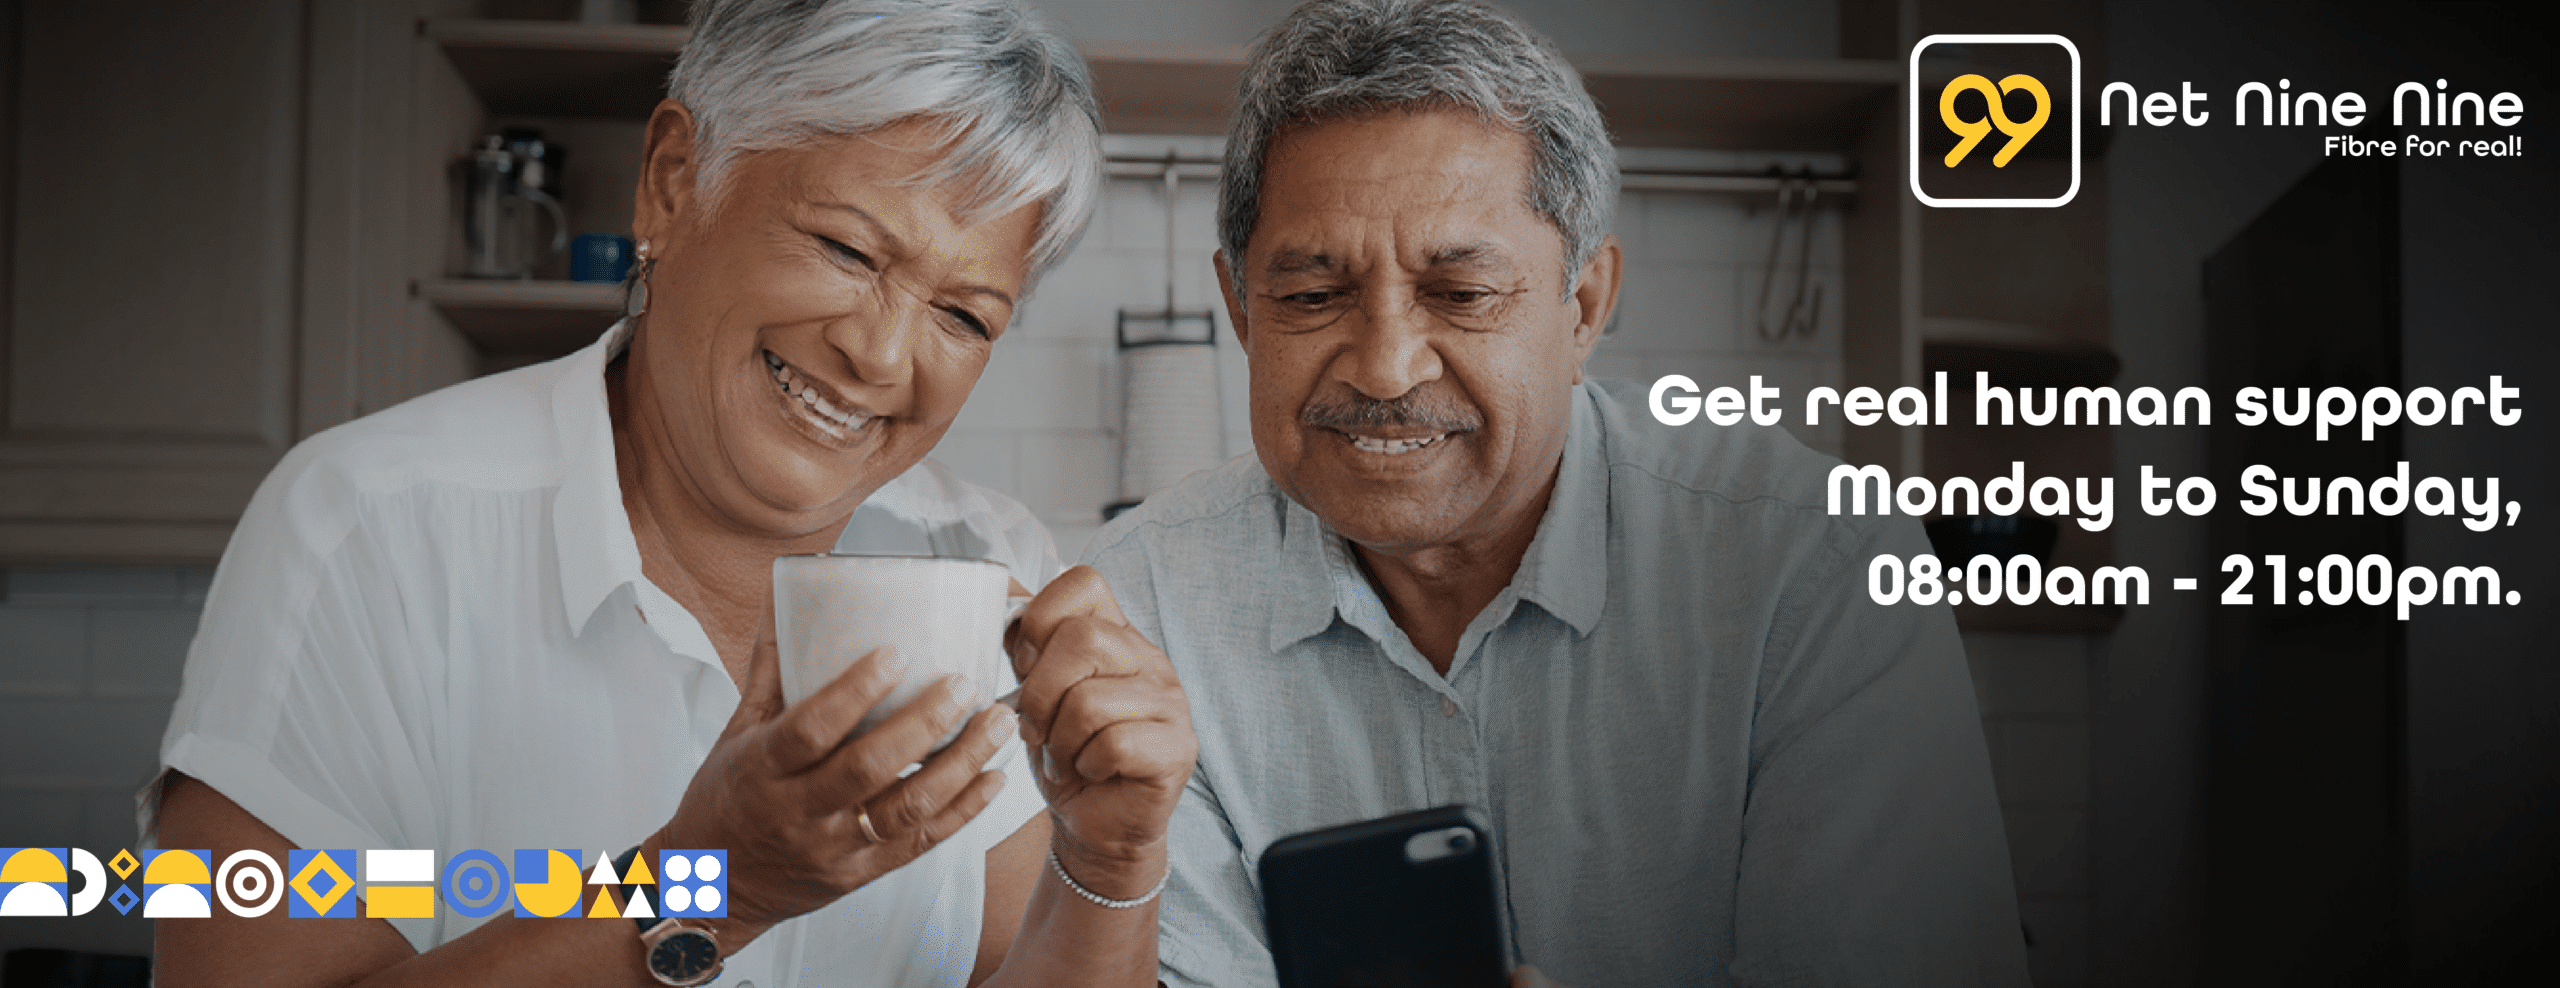 older woman and man smiling at cellphone